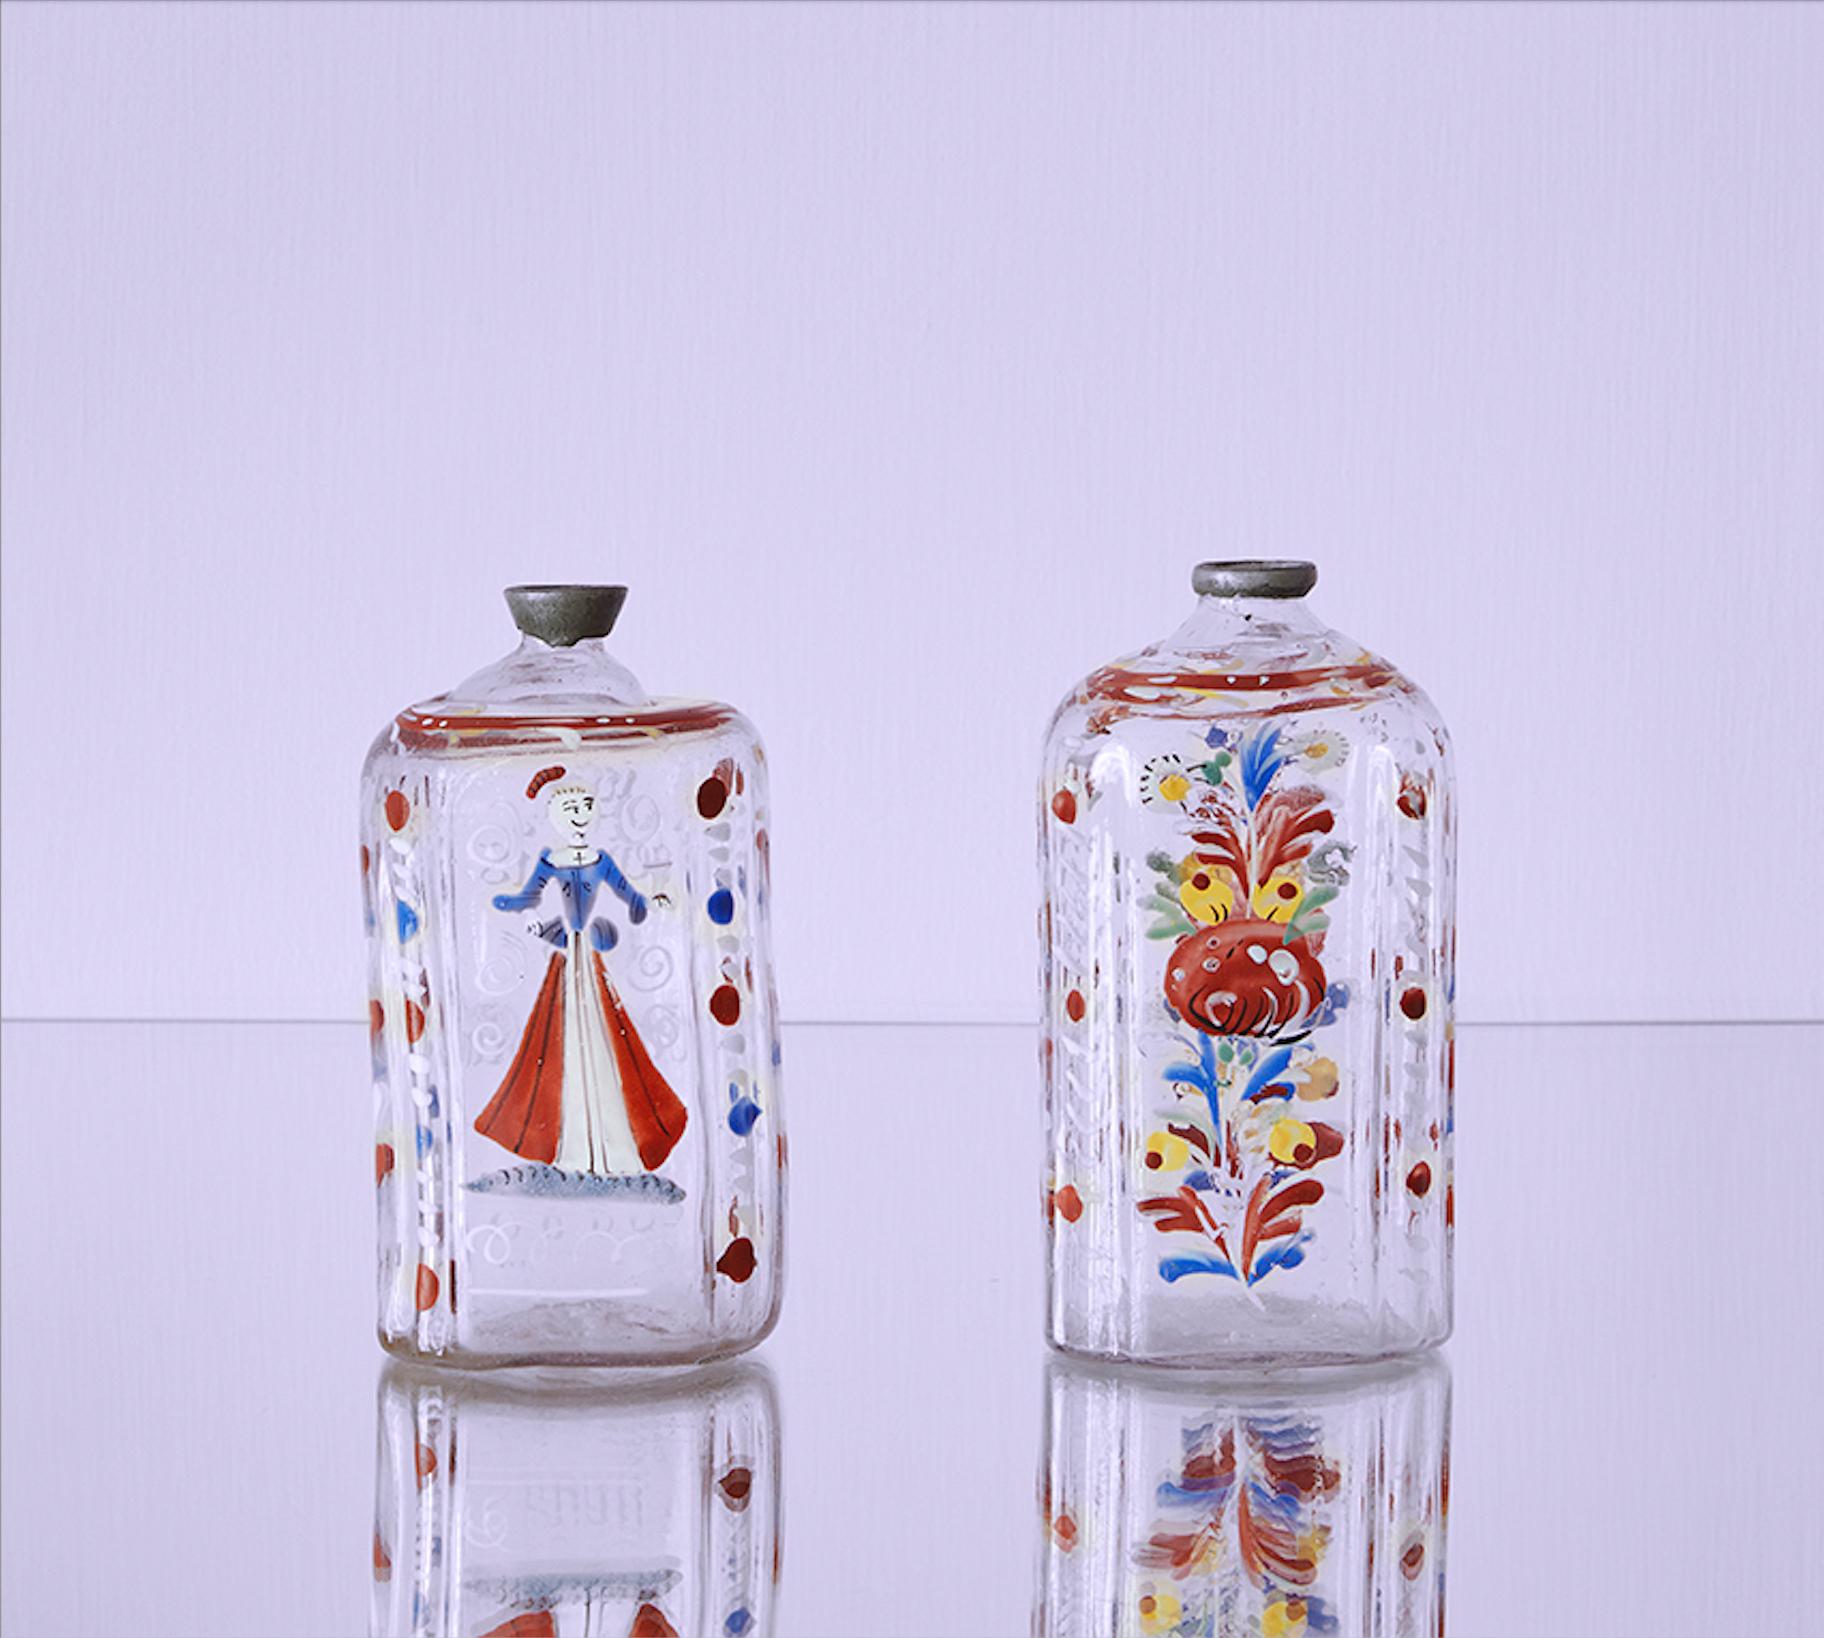 Germany , 18th Century

A pair of clear, enameled glass bottles.

H 13 cm